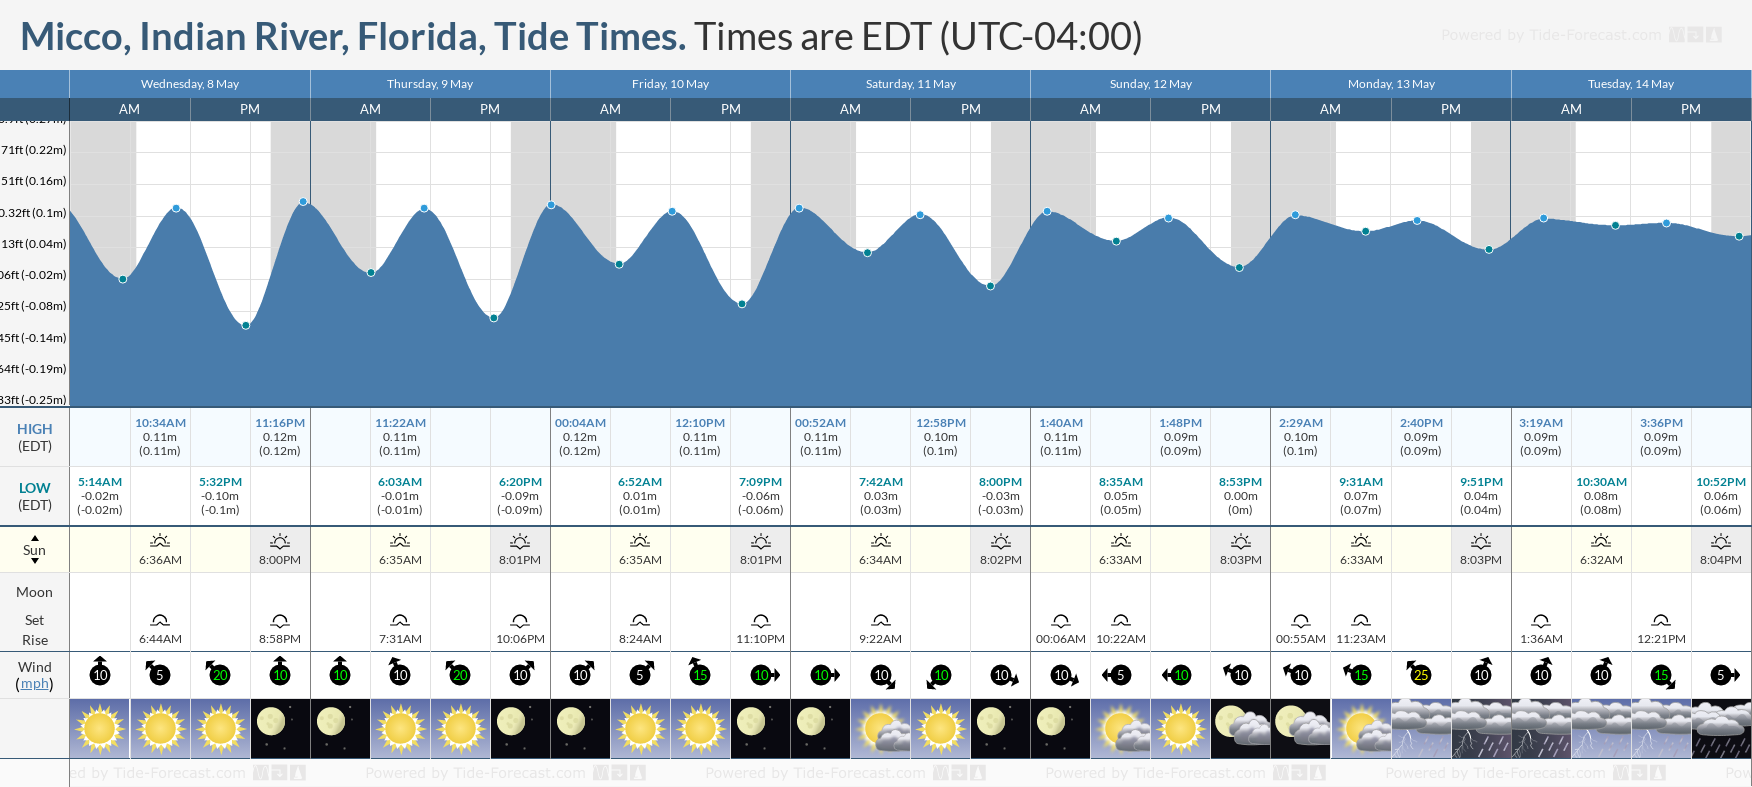 Micco, Indian River, Florida Tide Chart including high and low tide tide times for the next 7 days